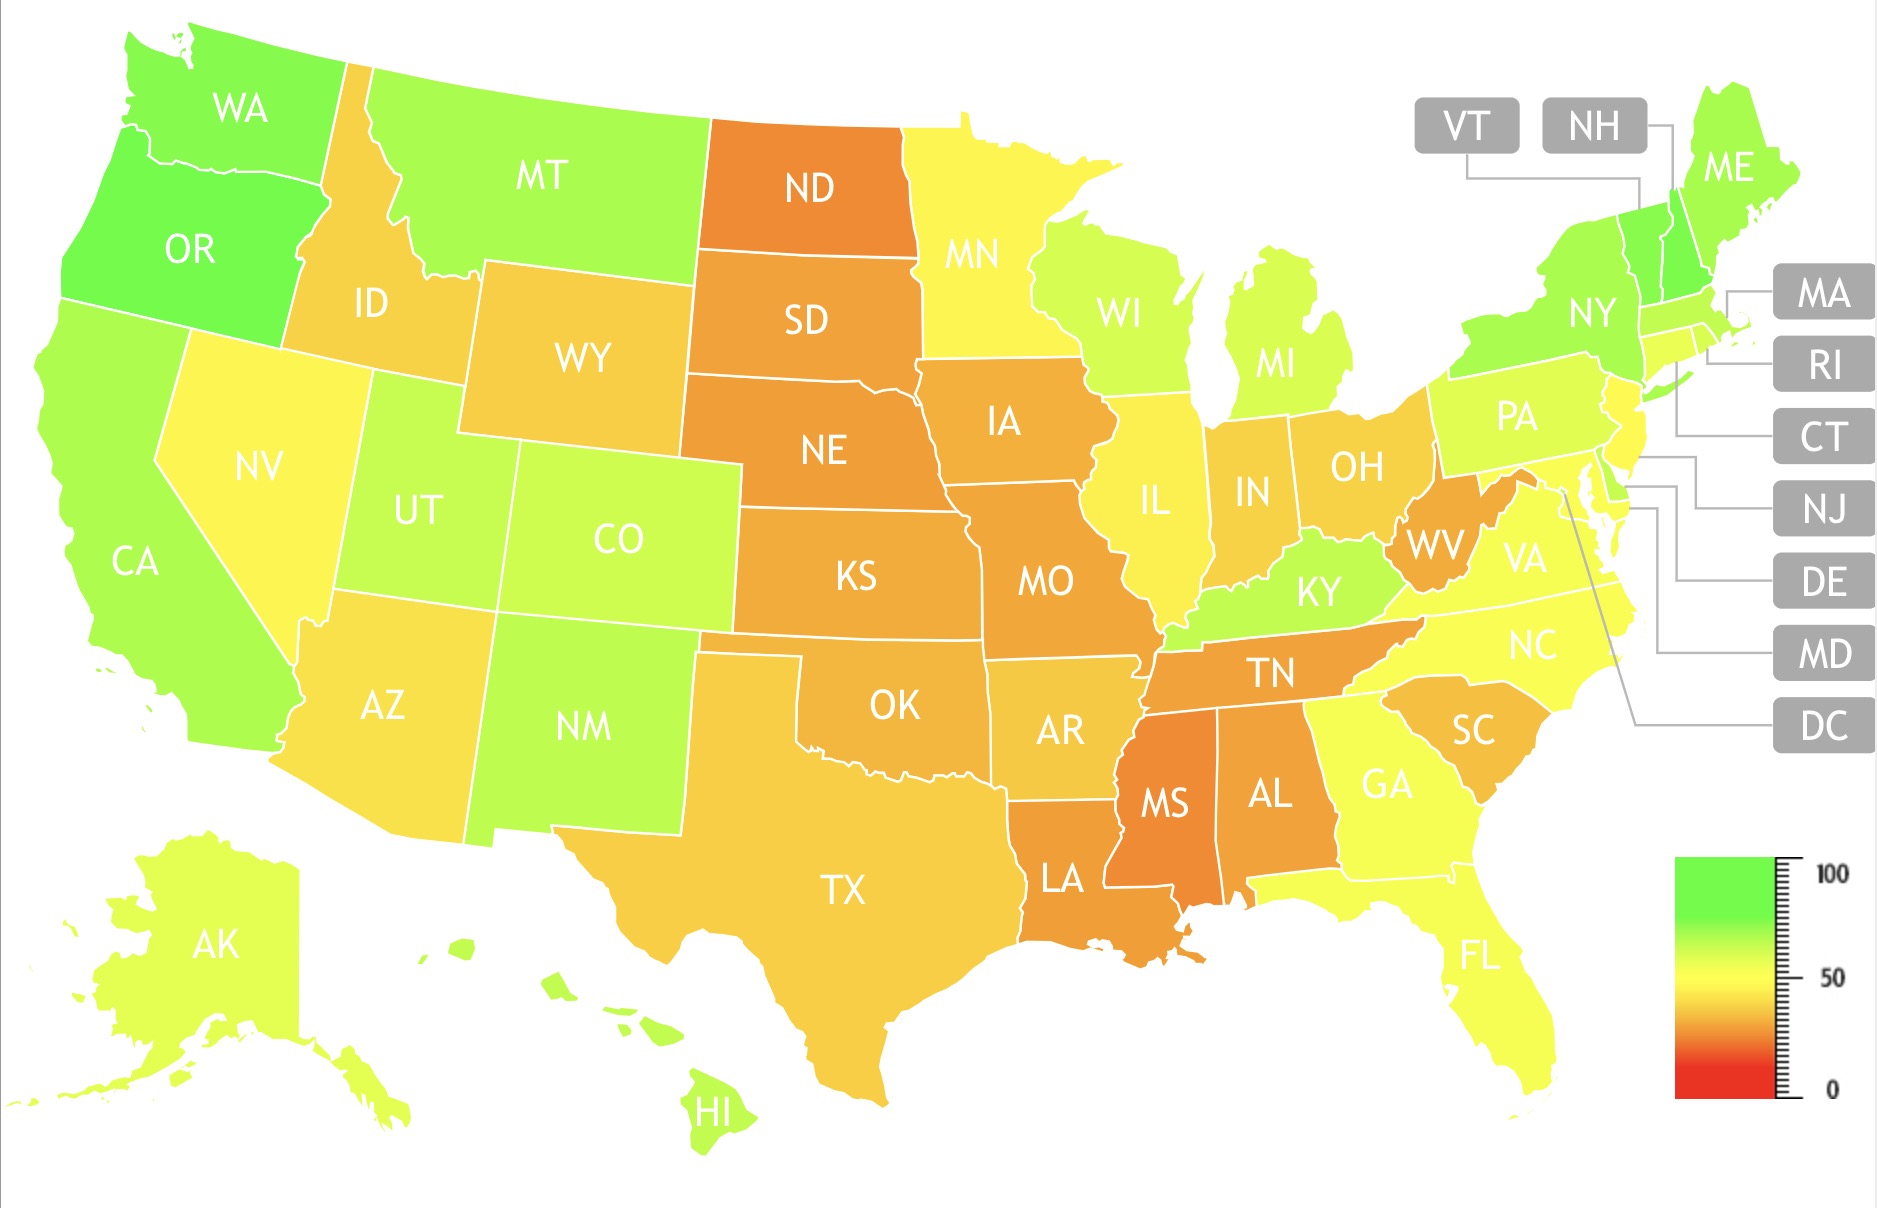 Using Google Search data, researchers were able to determine the levels of interest in vegan and plant-based diets in the United States over the period 2004 to 2019. The search data is compiled state-by-state to build up a picture of interest over the period, each state’s degree of interest is represented using a colour scale to denote intensity of interest. States highlighted in green represent those with a high interest in vegan/plant-based diets, those highlighted in red denote states with the least interest. To use the interactive chart, click link ?